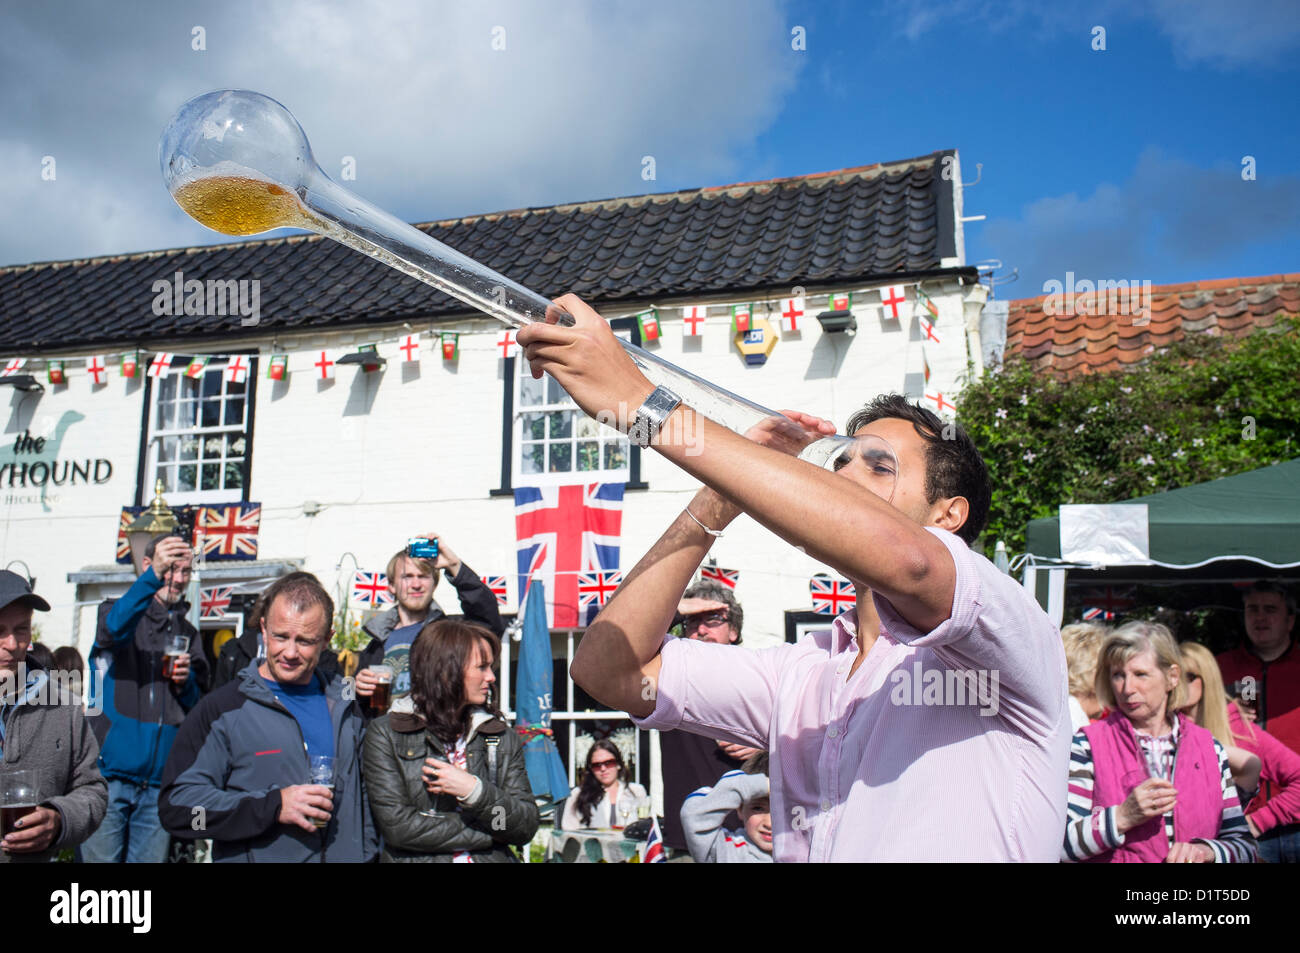 Young Man Drinking Yard of Ale at Village Pub During Queen's Diamond Jubille Celebrations Stock Photo